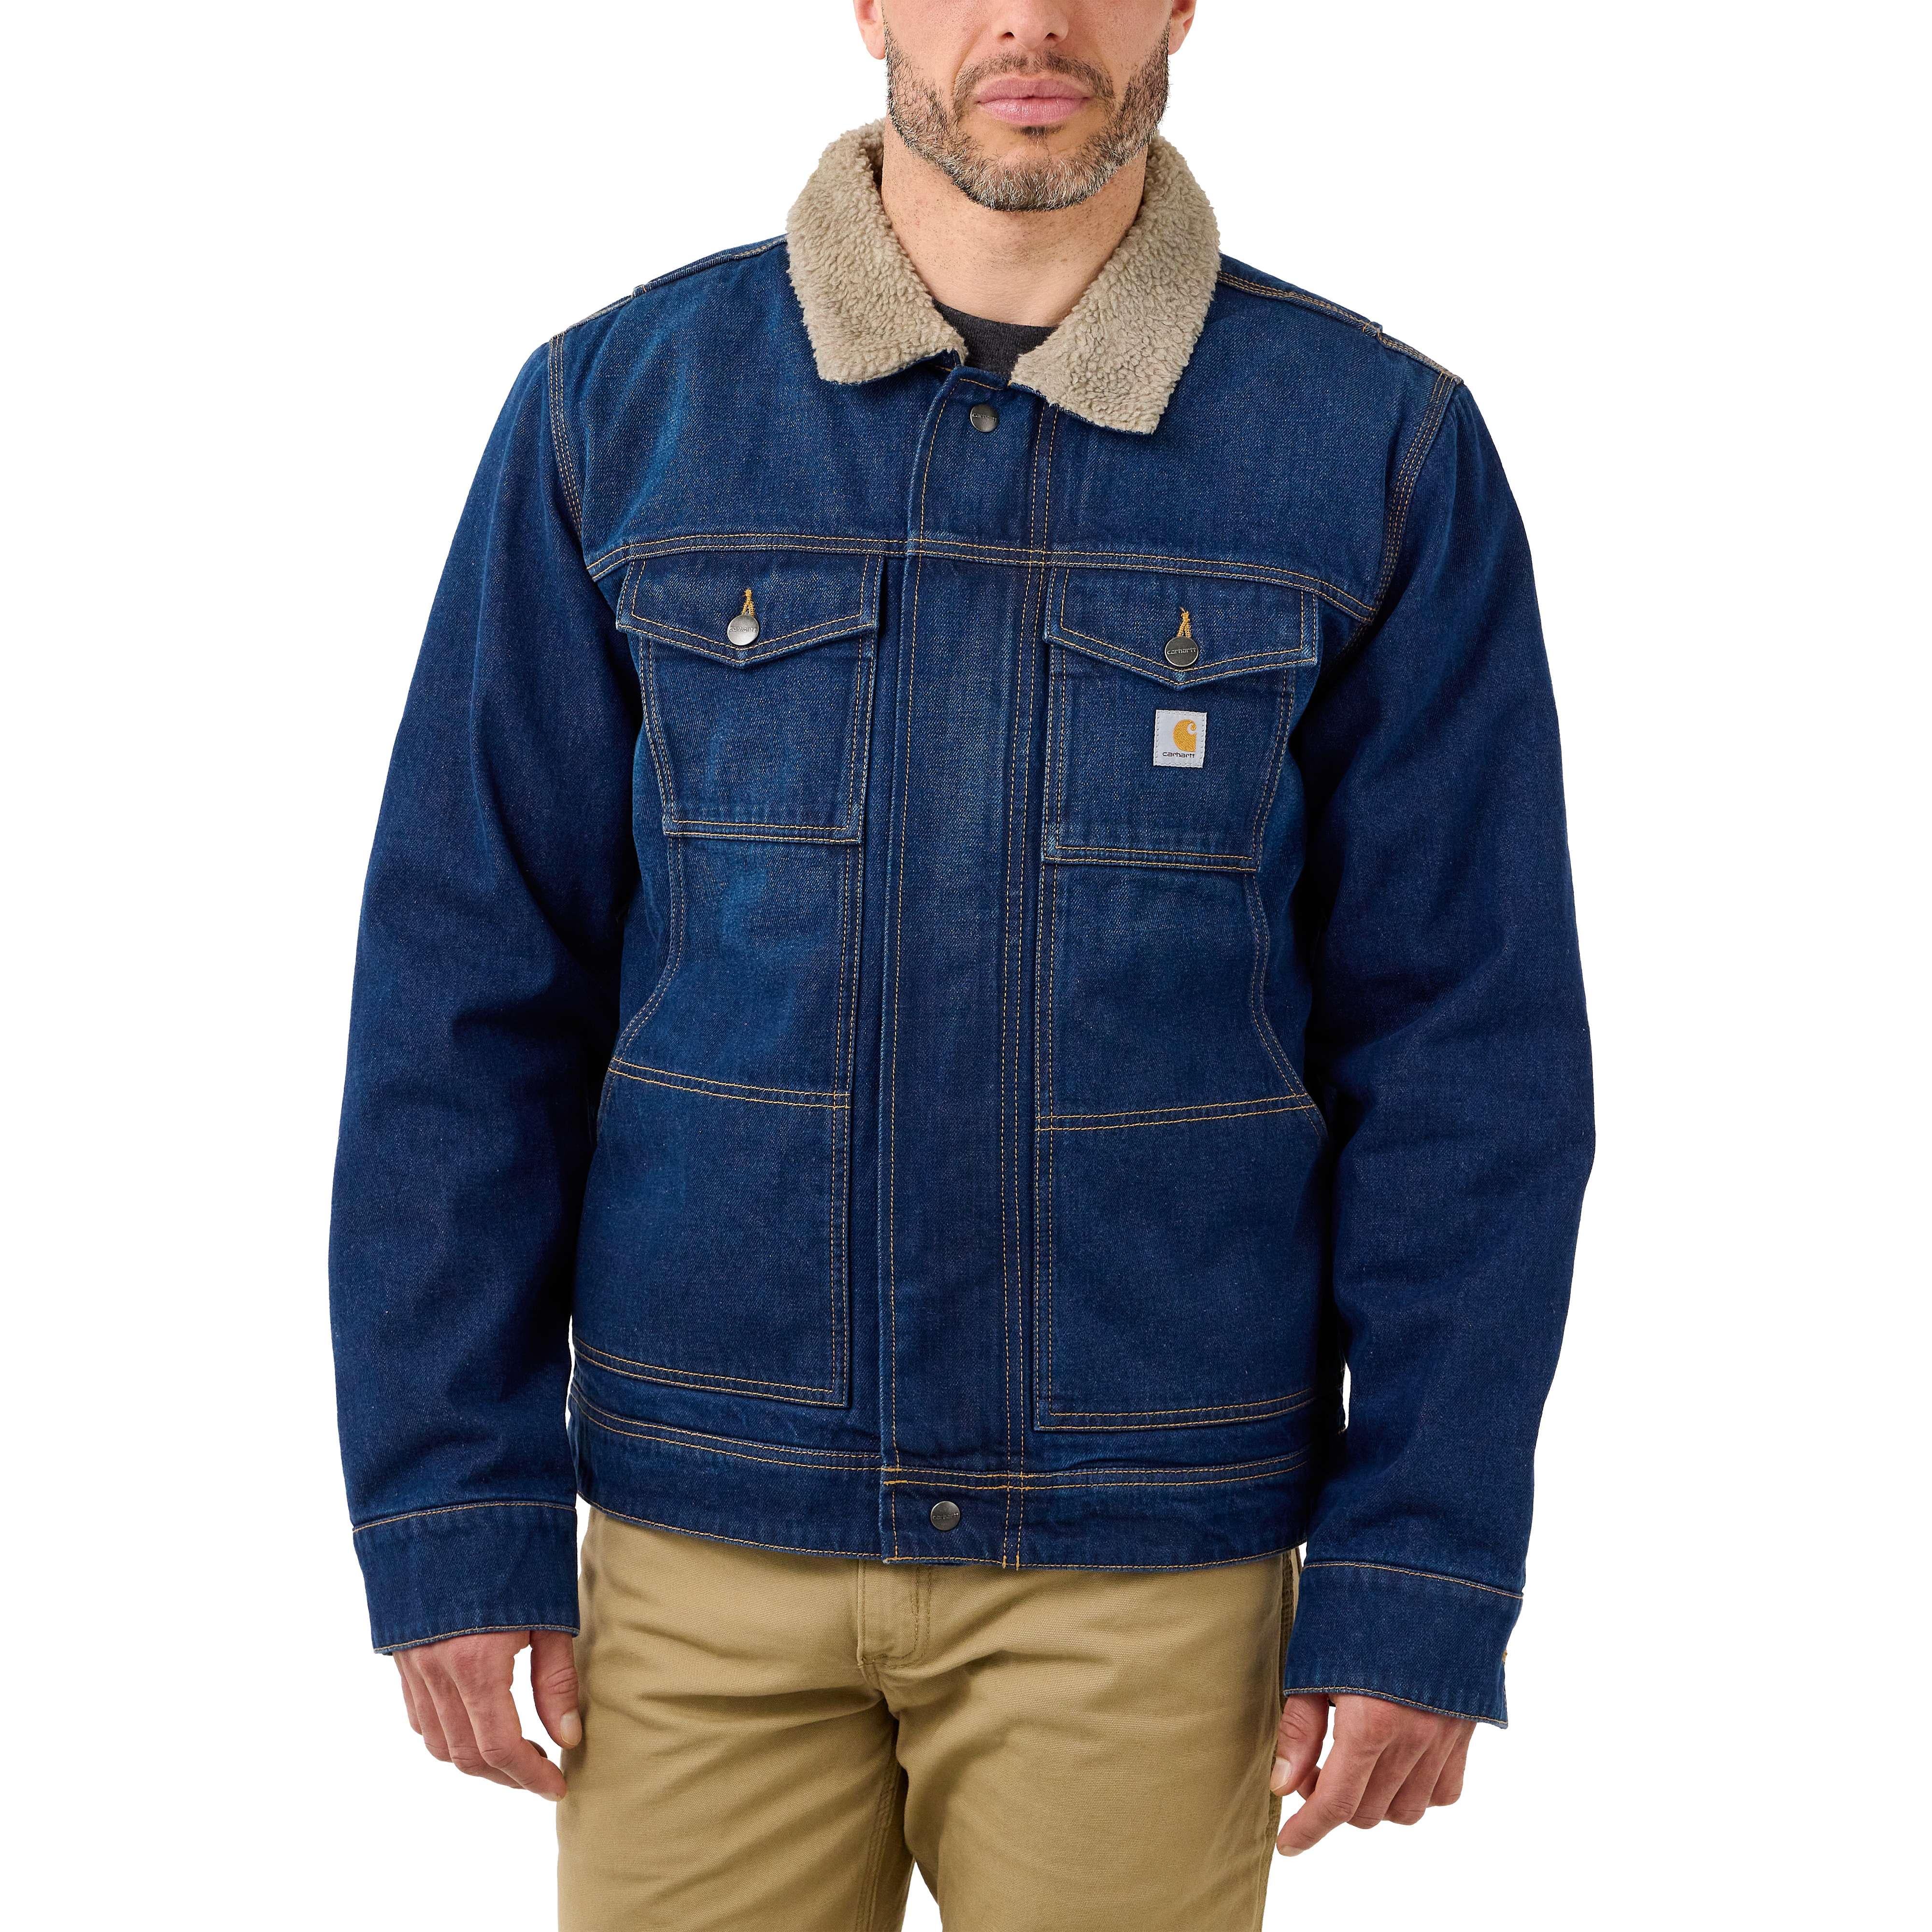 28 CARHARTT ideas  carhartt, carhartt jacket, carhartt work in